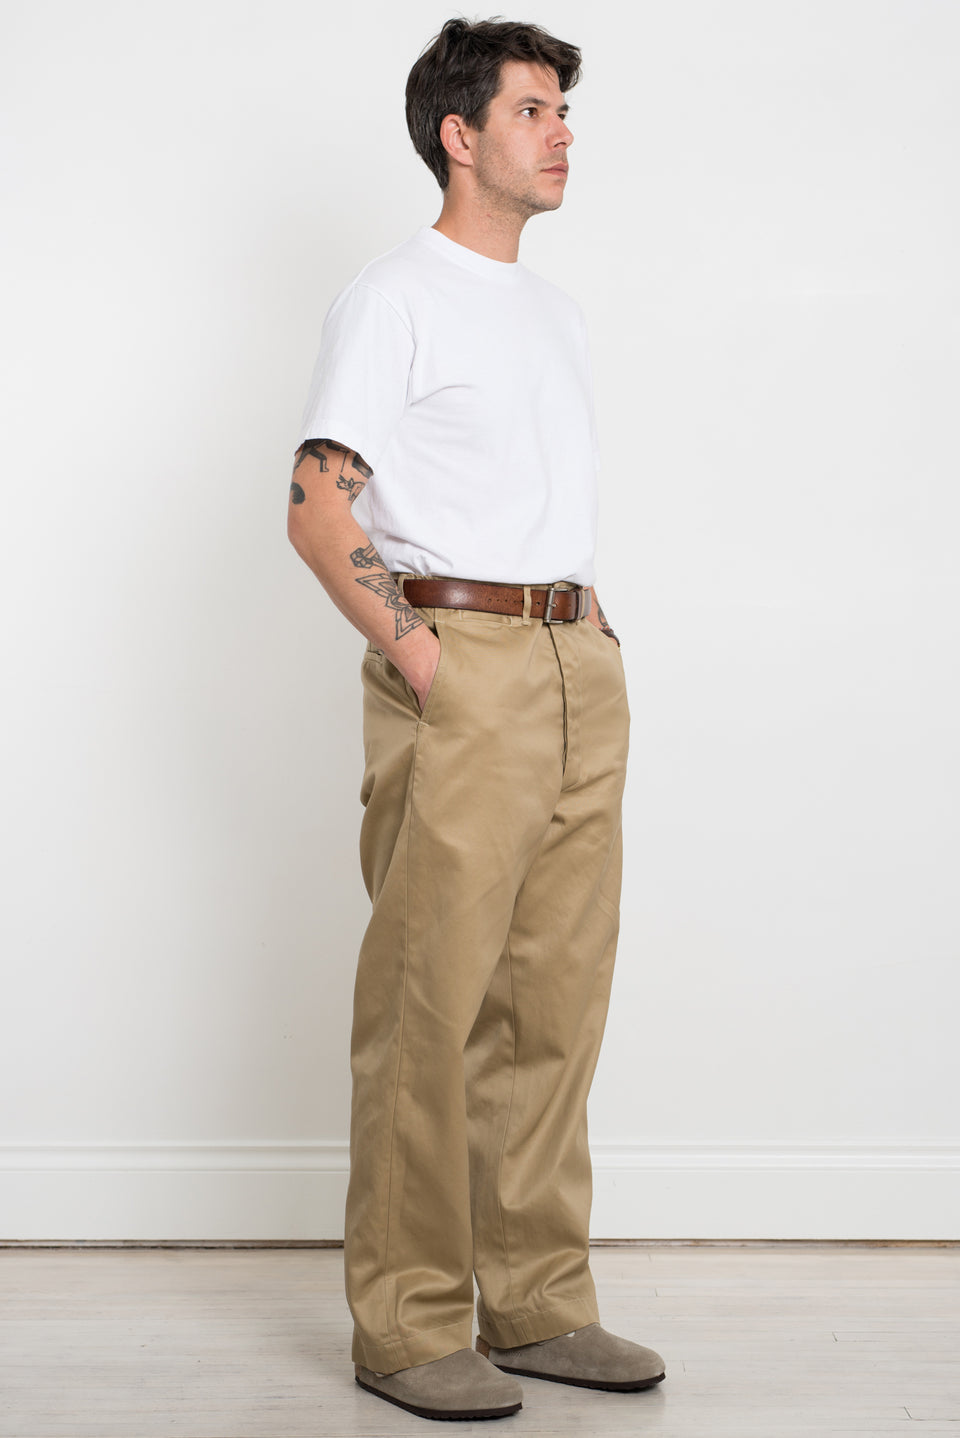 OrSlow 23SS SS23 03-V5361-40 Vintage Fit Army Trousers Khaki Calculus Victoria BC Canada